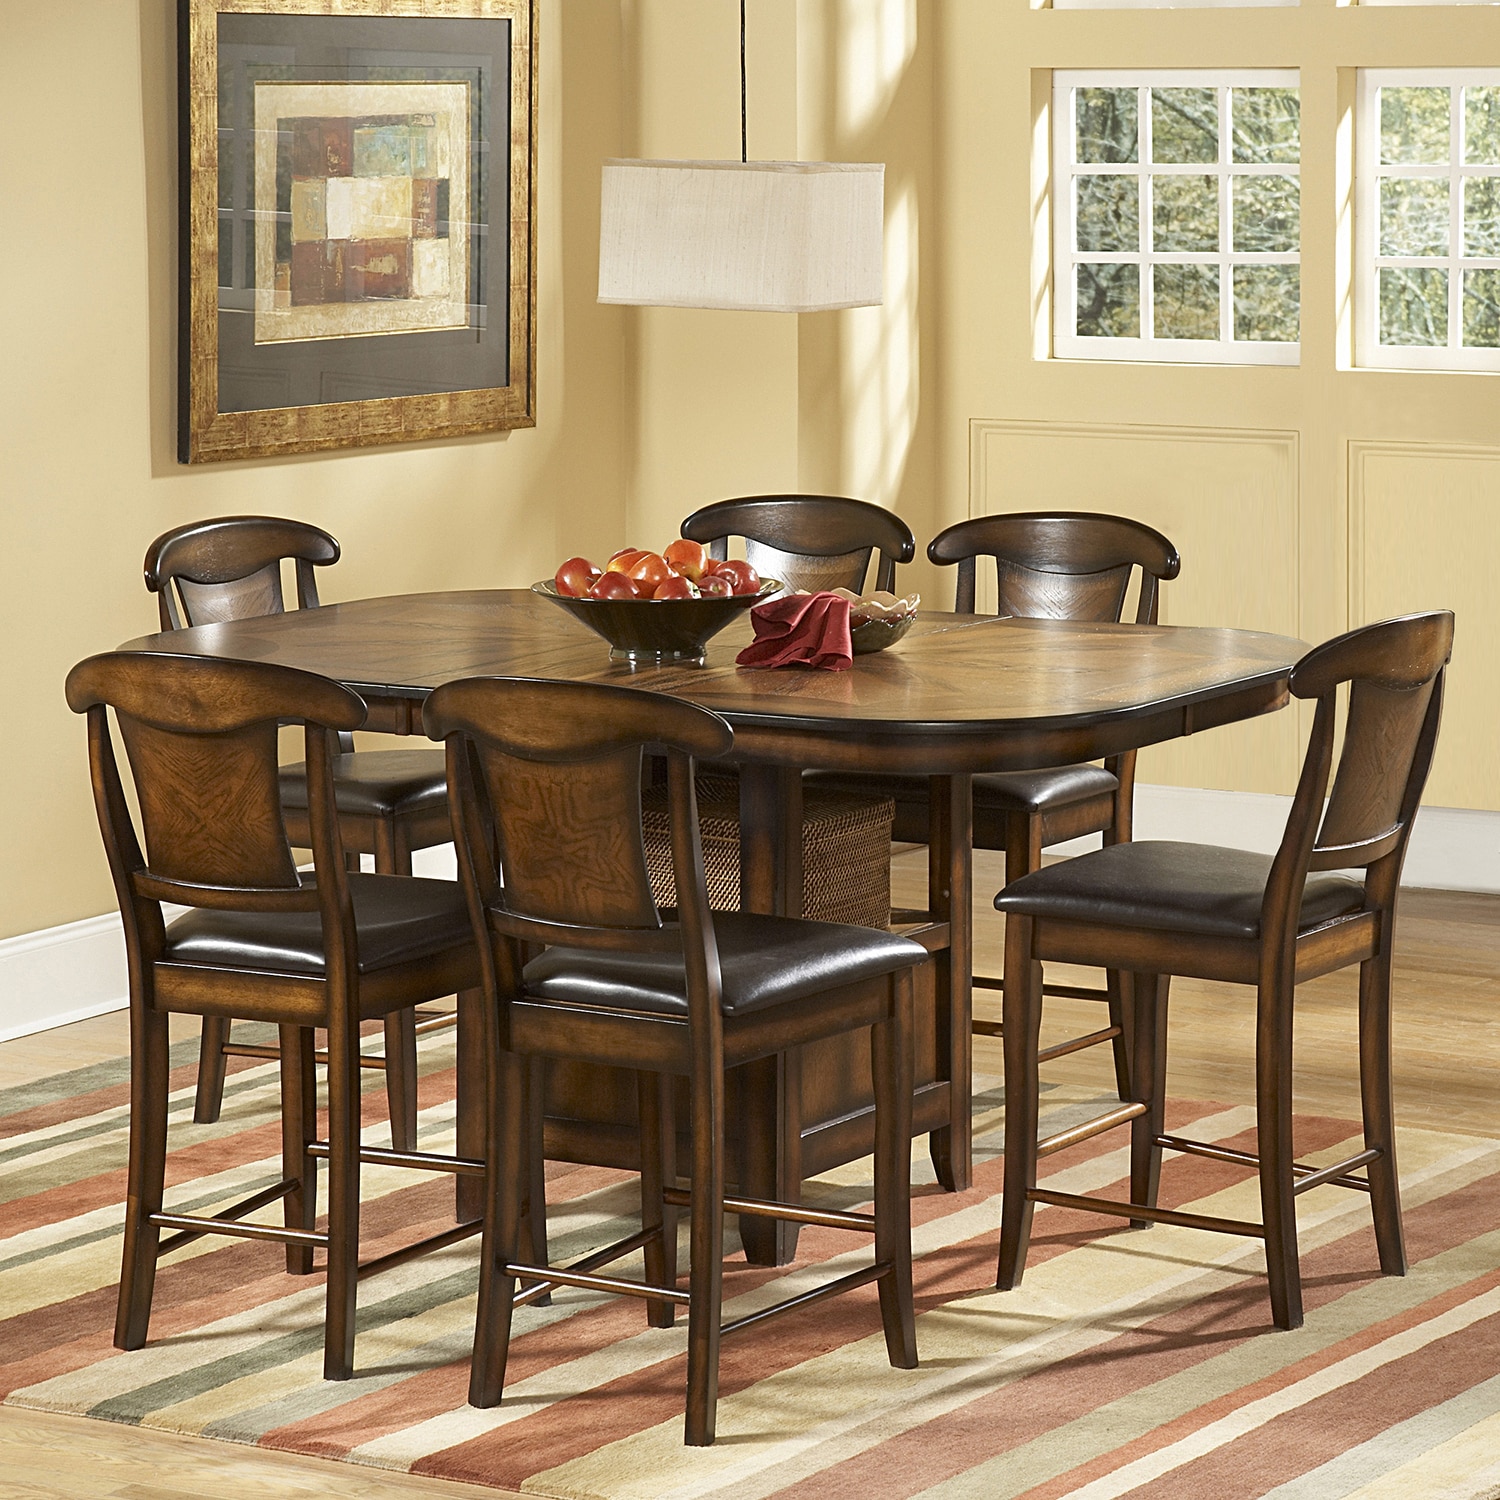 Tribecca Home Tribecca Home Glenbrook 7 Piece Counter Height Dining Set Brown Size 7 Piece Sets